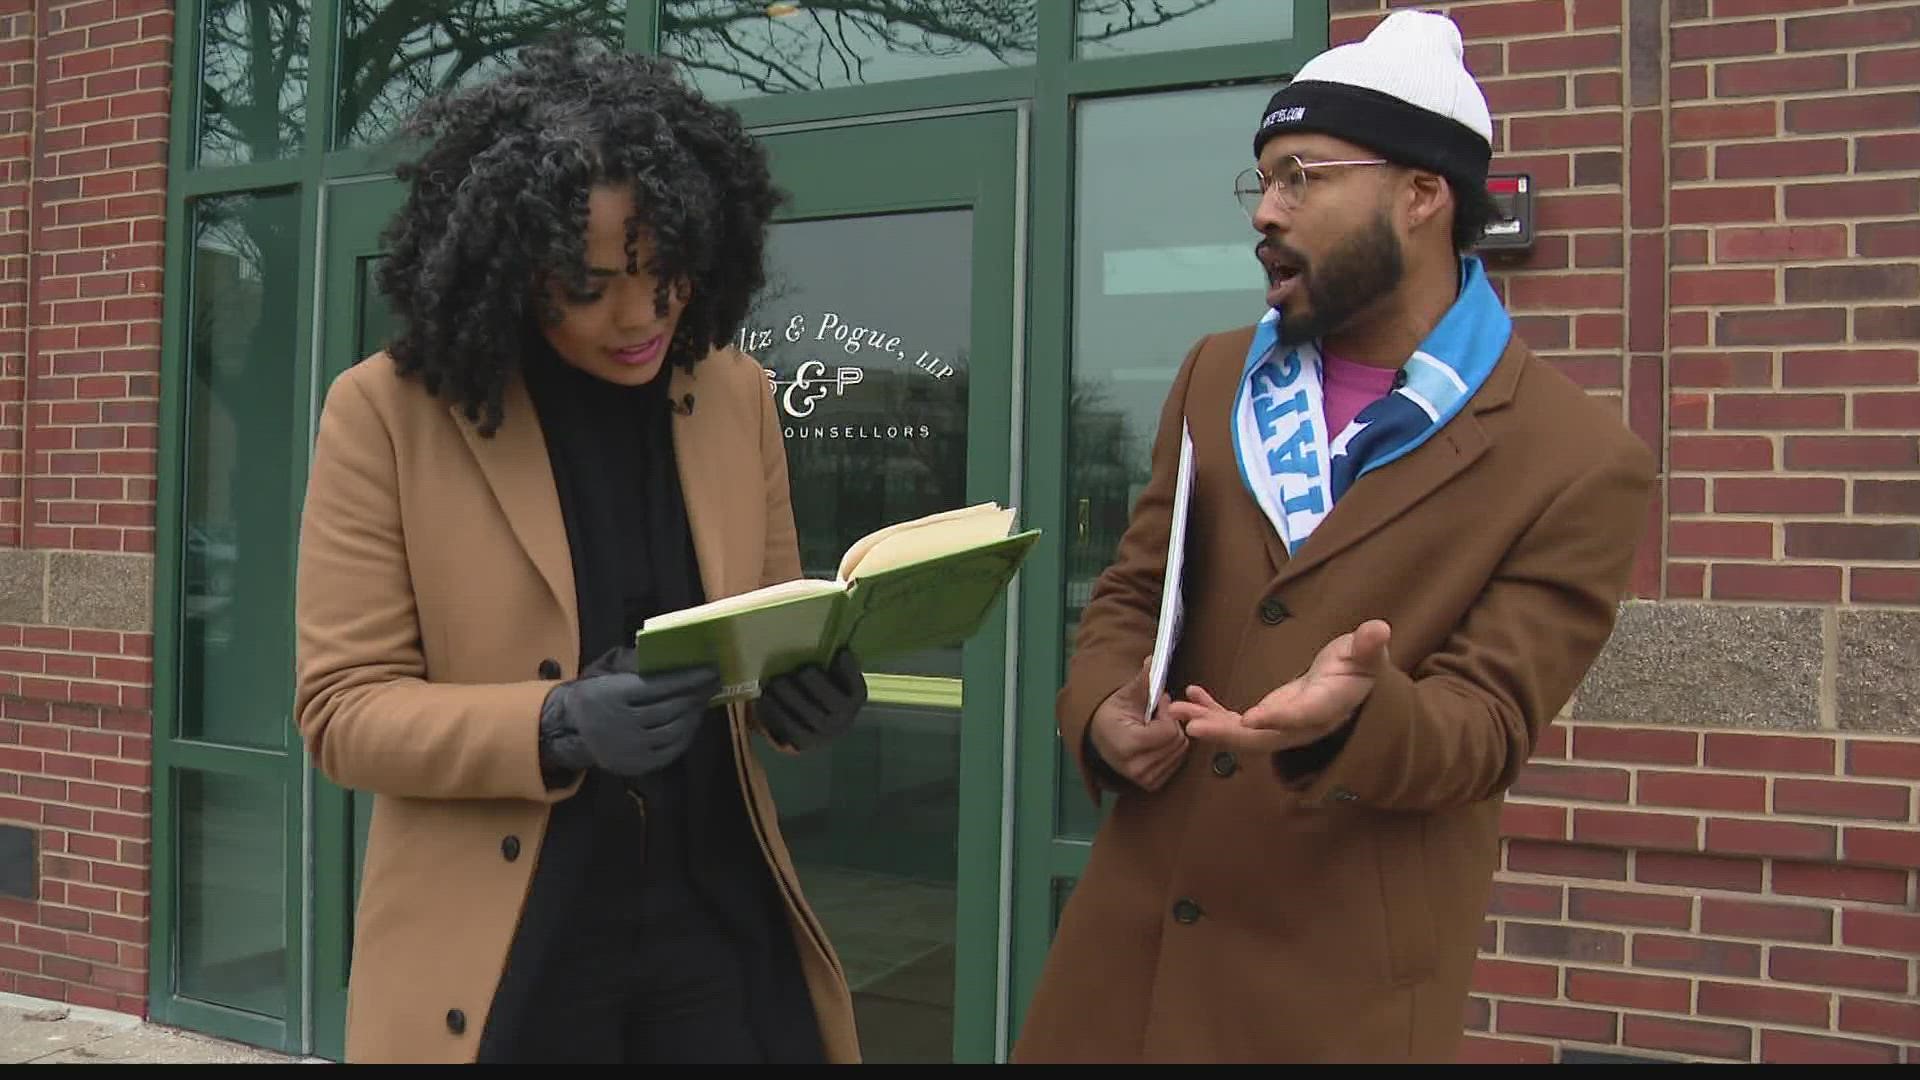 13News Anchor Felicia Lawrence took a tour with Sampson Levingston, highlighting specific locations  found in The Green Book.